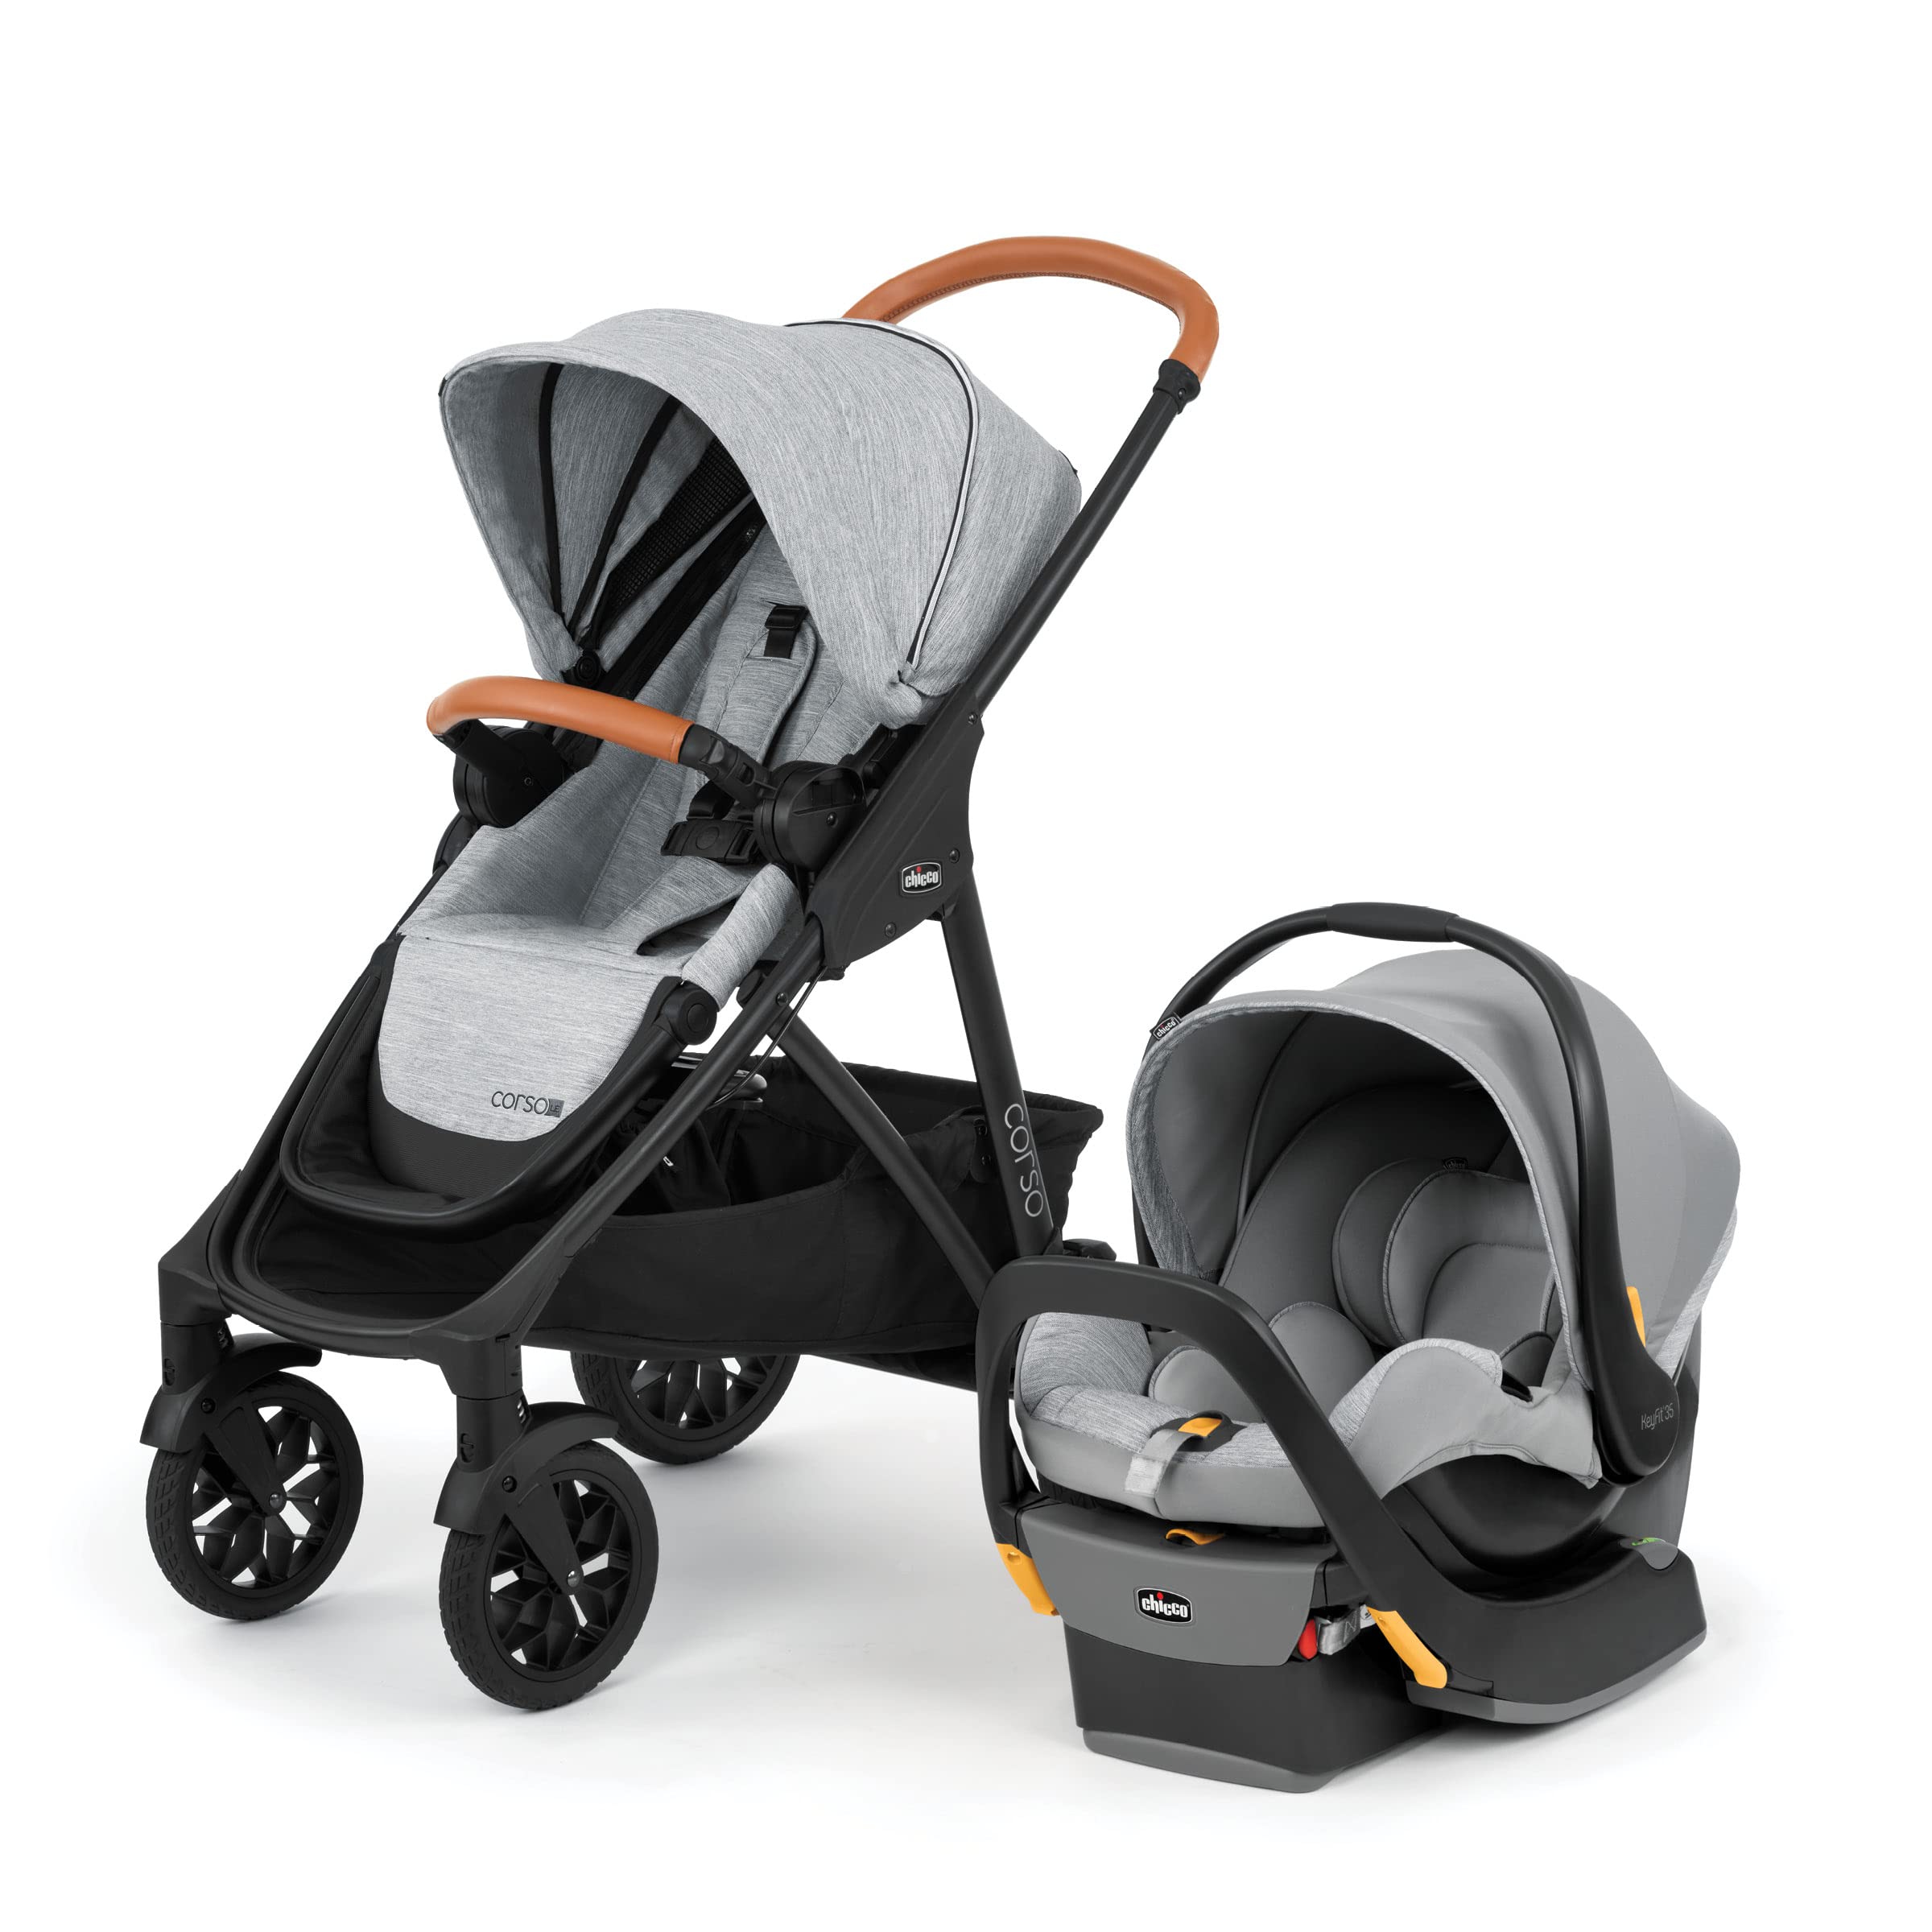 Chicco Modular Travel System - Corso LE Stroller, KeyFit 35 Infant Car Seat and Base - Stroller and Car Seat Combo in Veranda/Grey - $479.20